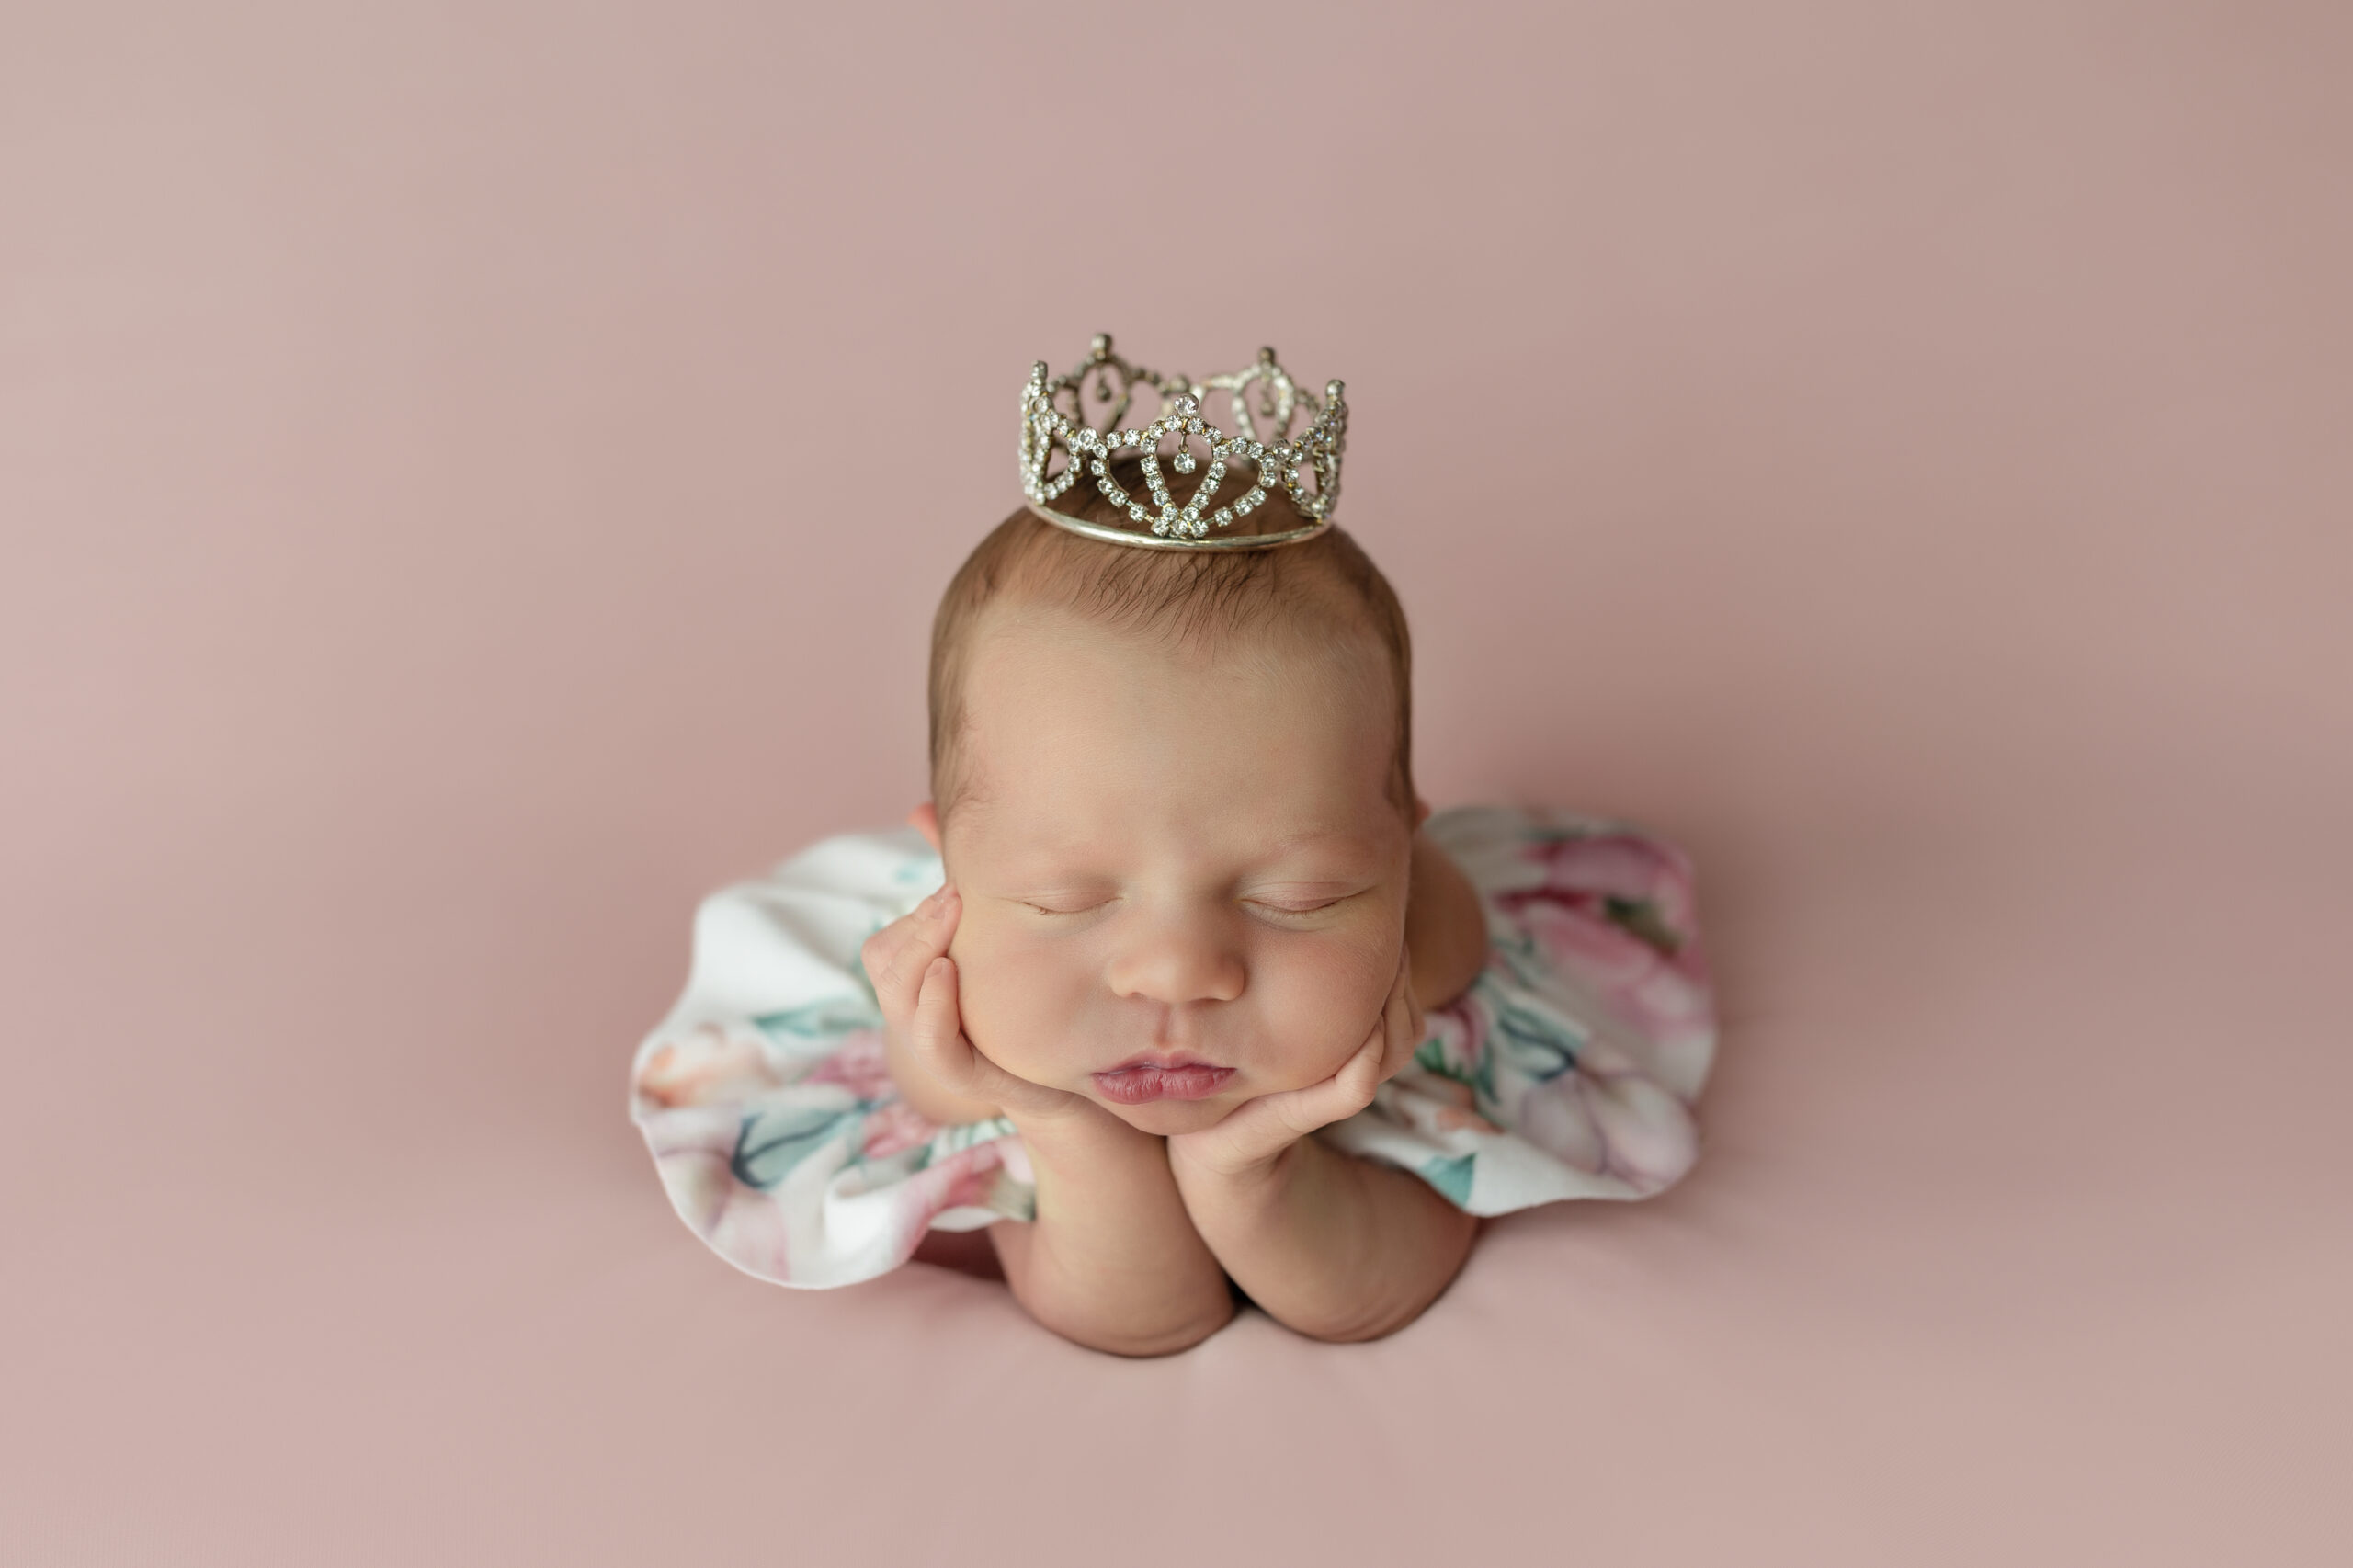 Newborn girl wearing a floral romper & princess crown in froggy pose.